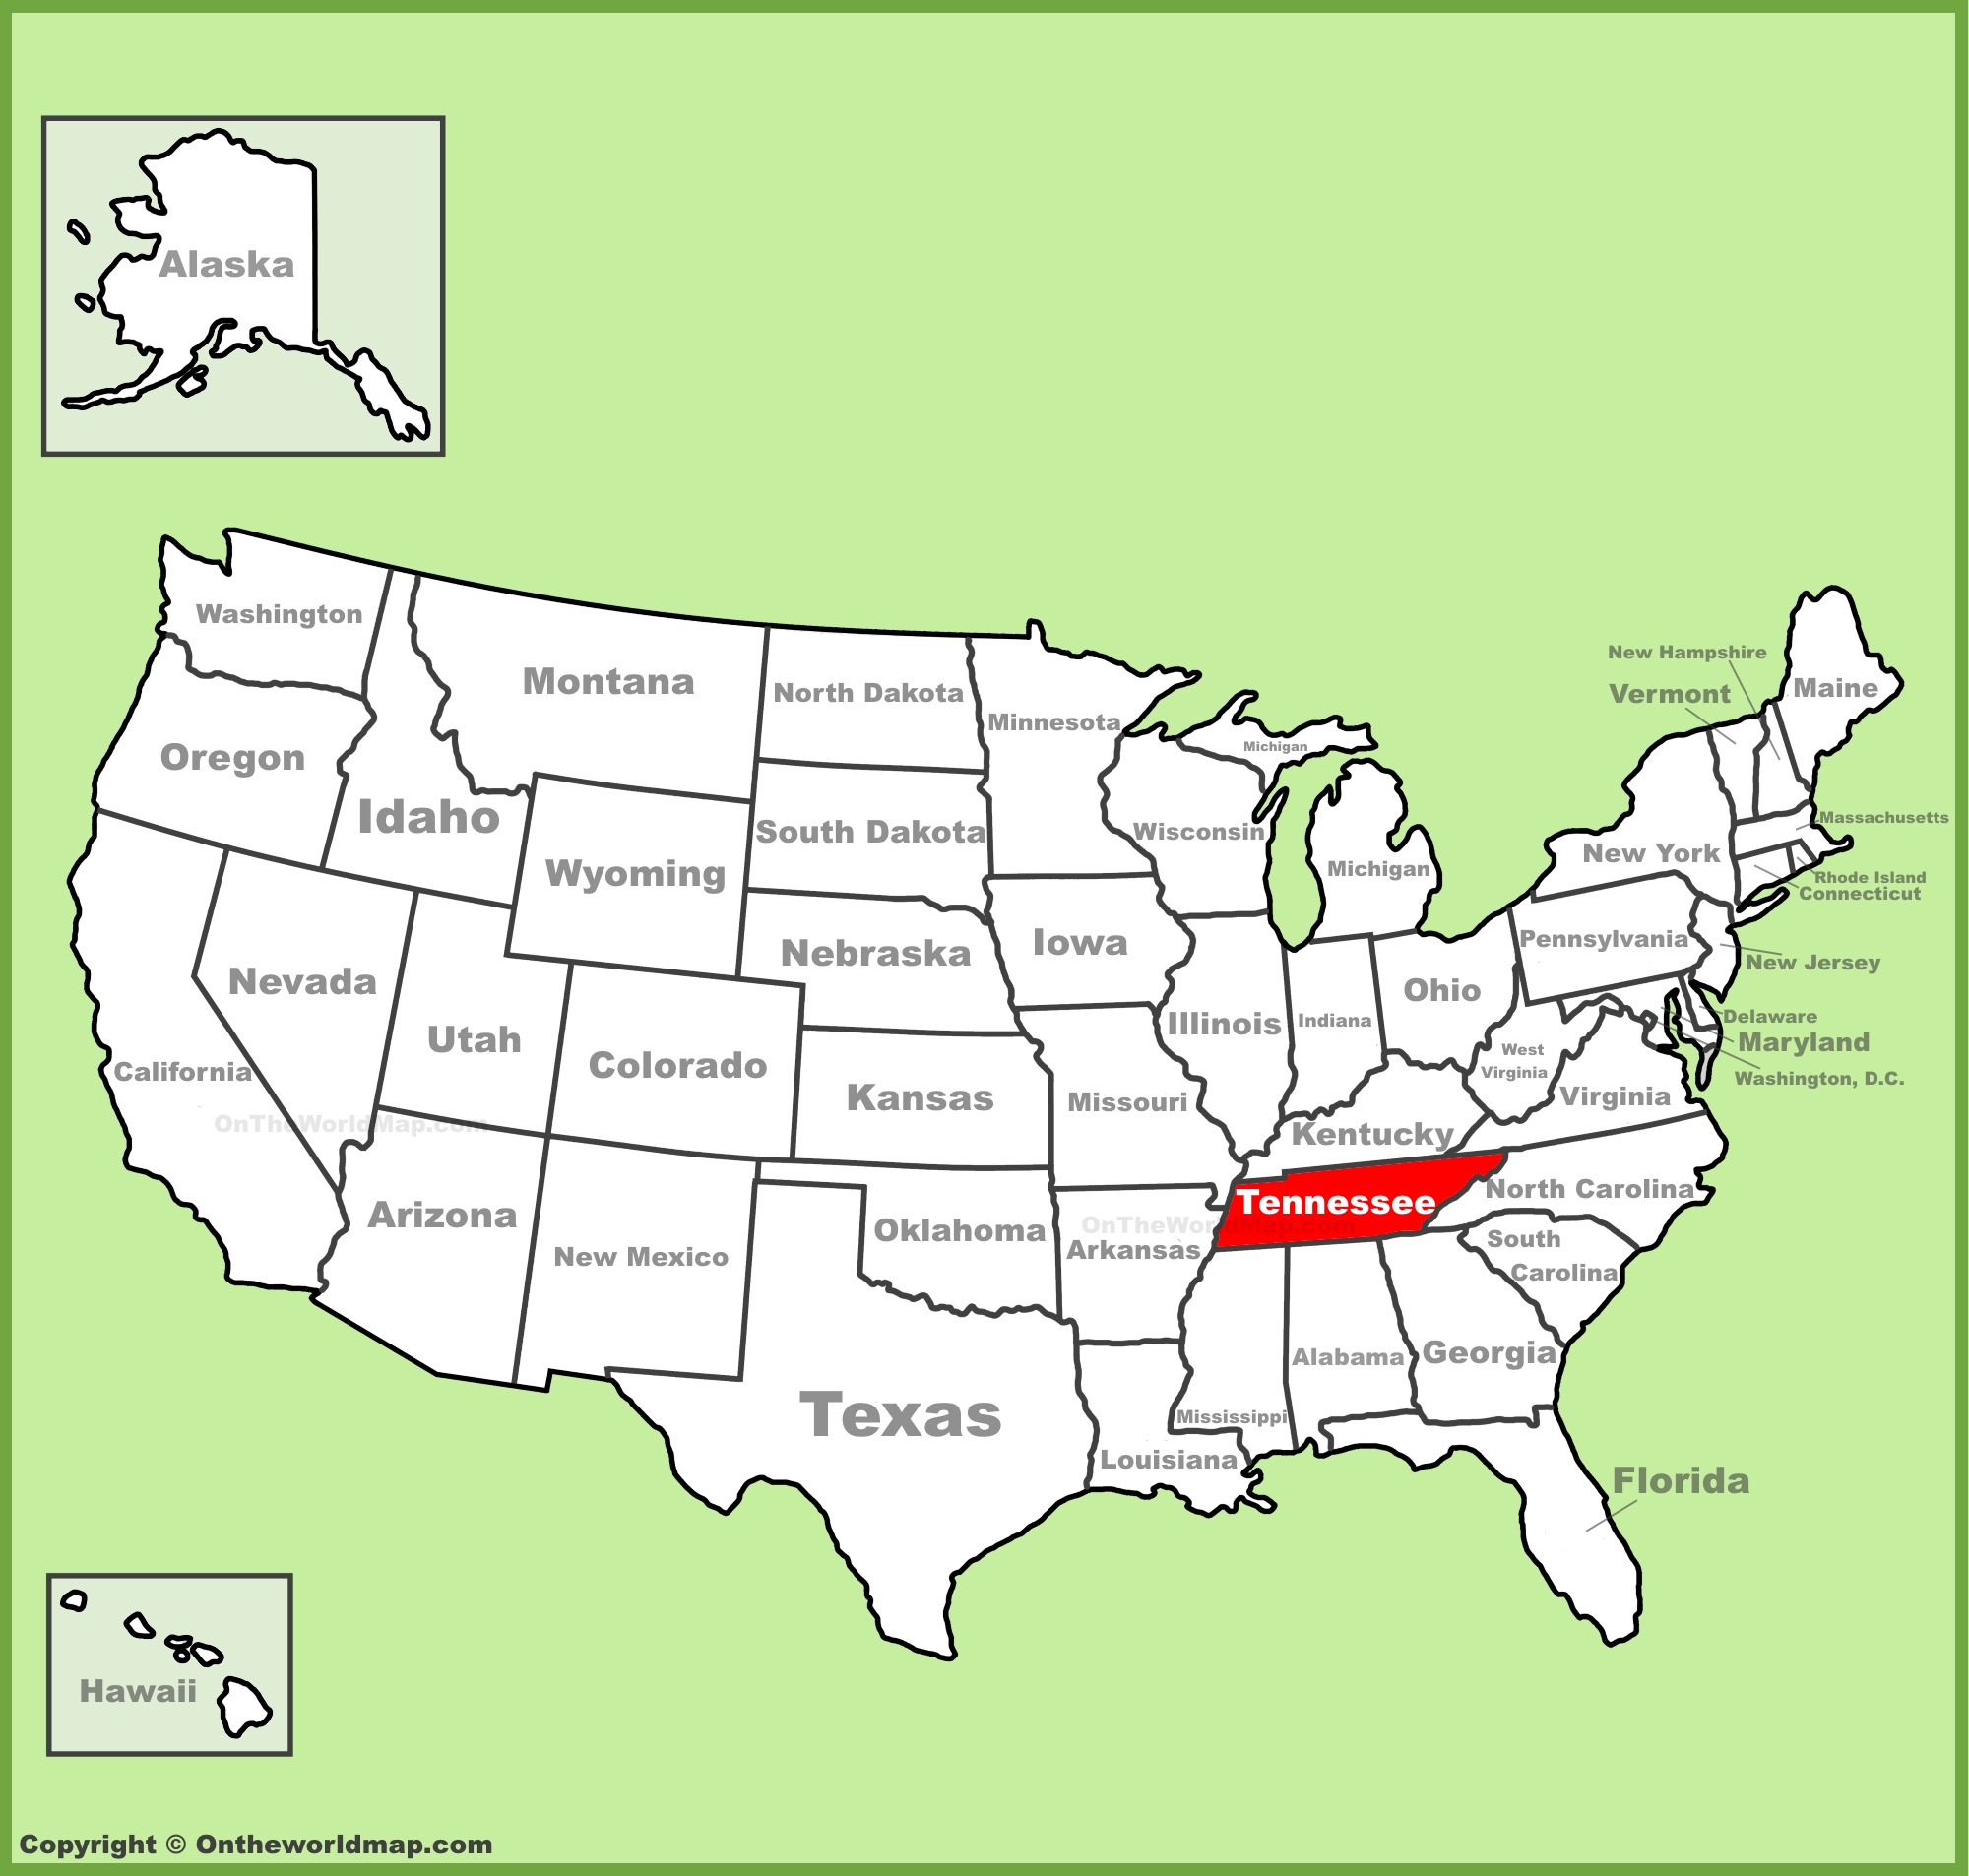 Tennessee State Maps | USA | Maps of Tennessee (TN) ﻿